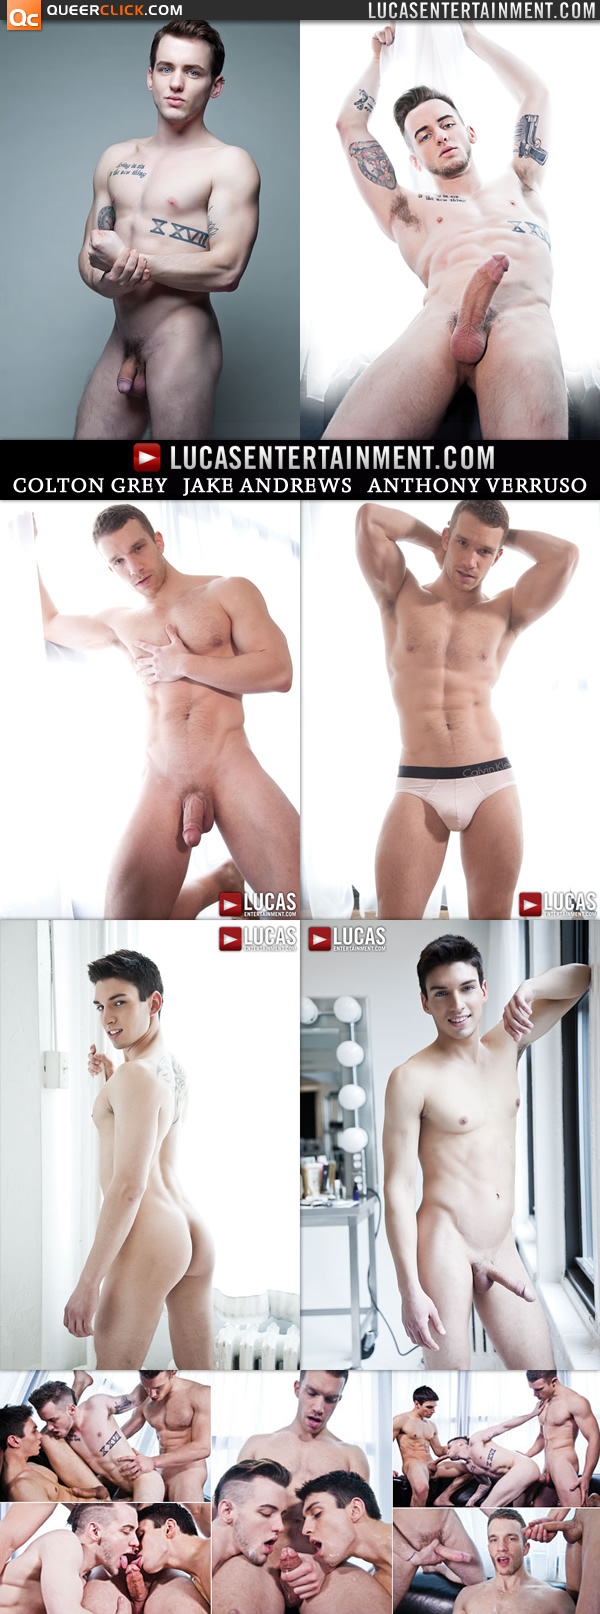 Lucas Entertainment: Colton Grey, Jake Andrews & Anthony Verruso